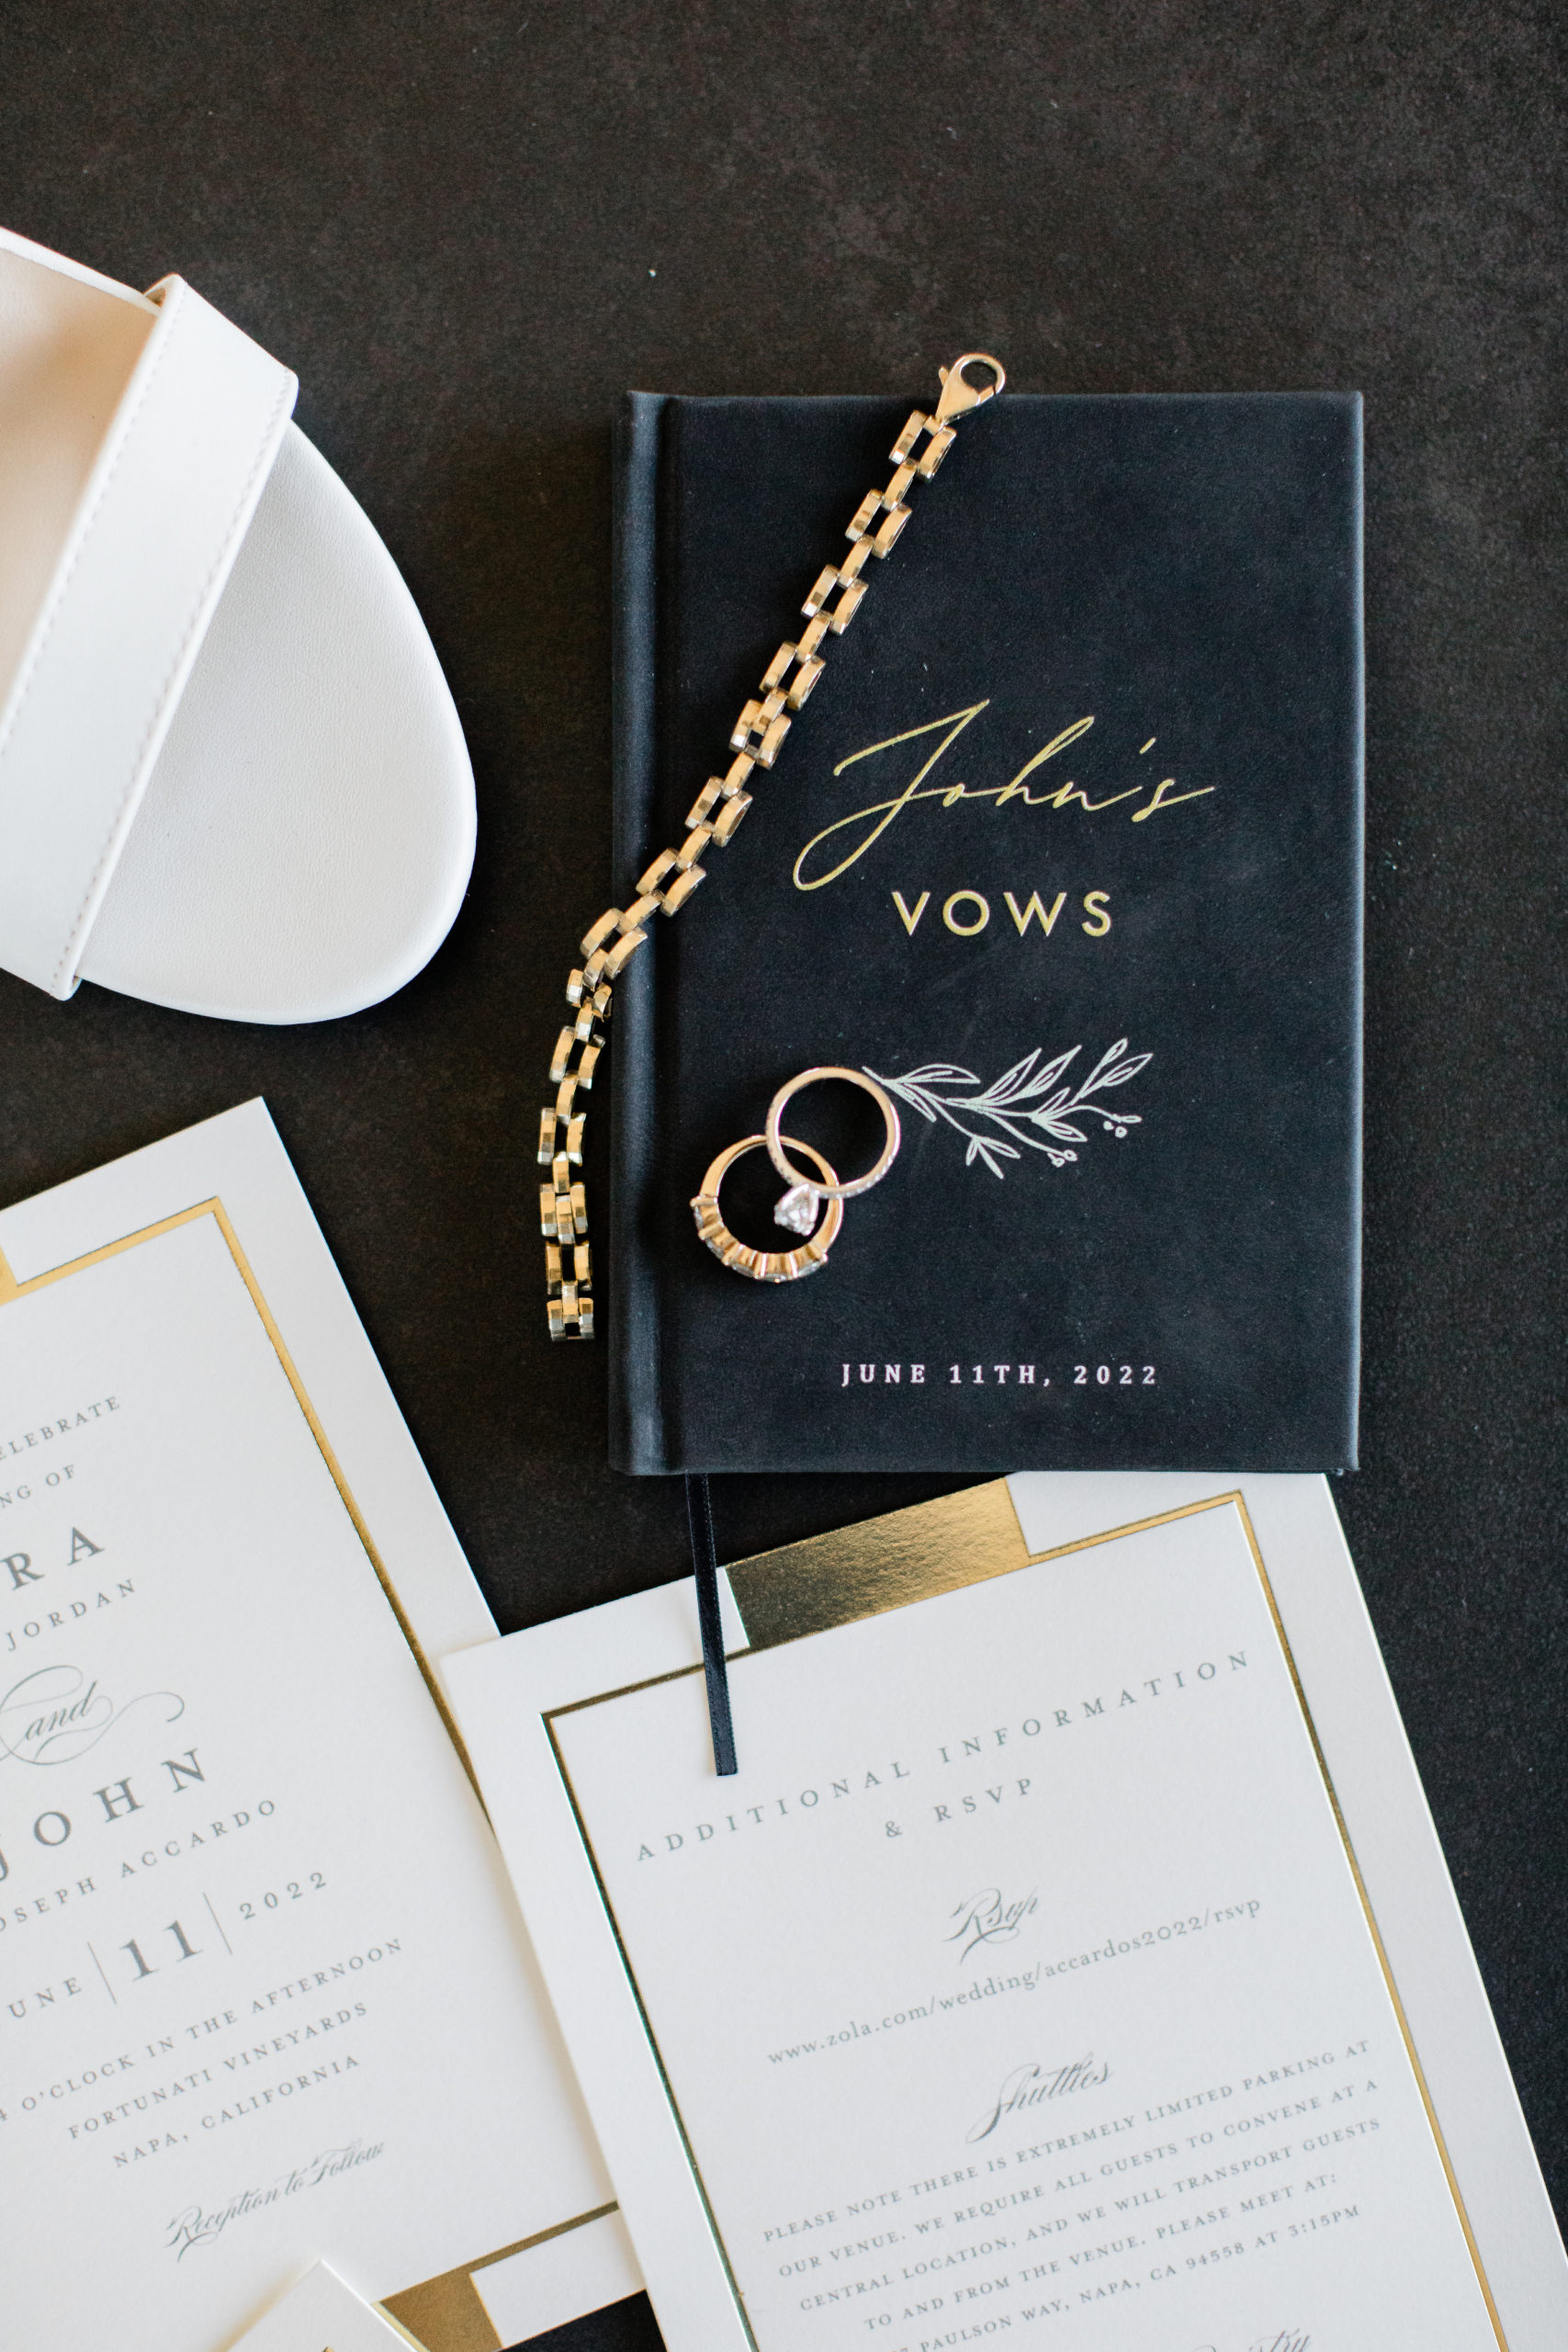 A gold bracelet and two gold rings on top of a "John's vows" book.